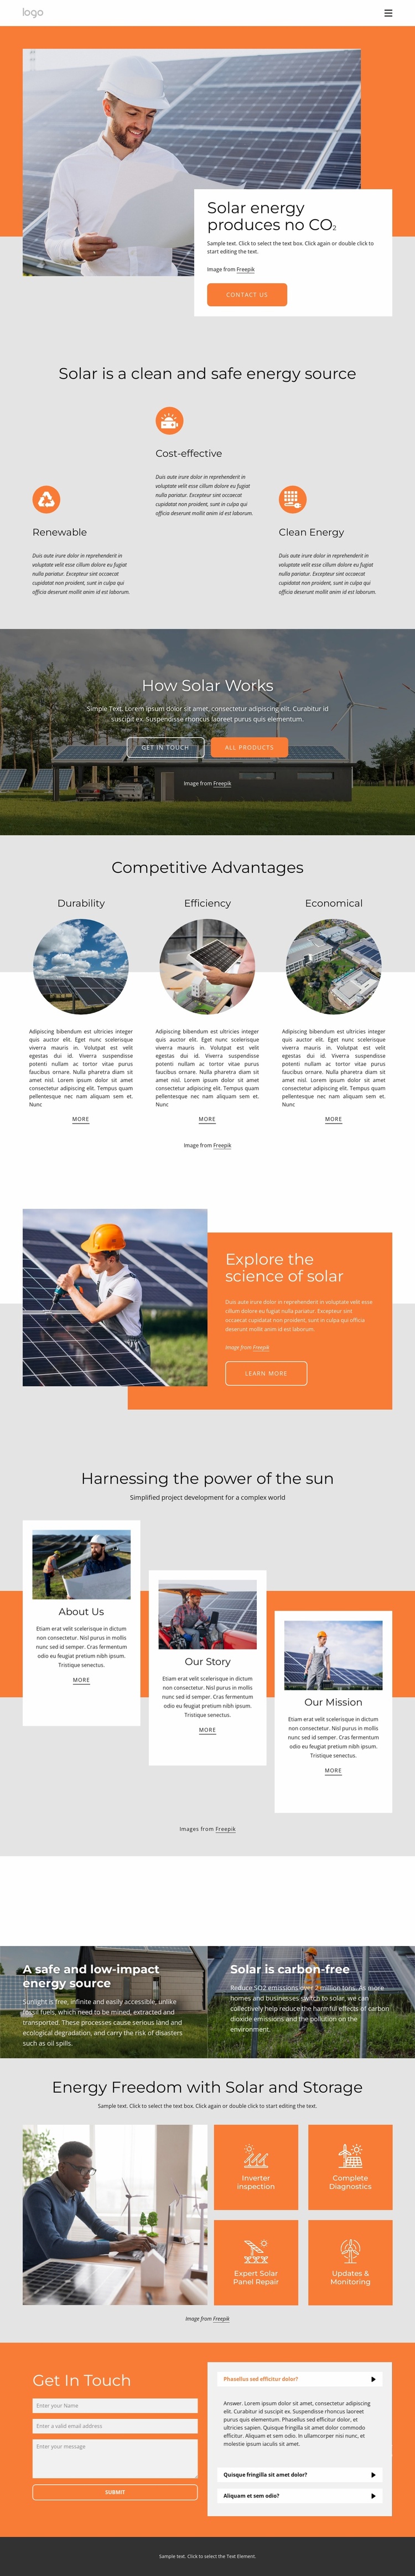 Power your home with clean solar energy Landing Page